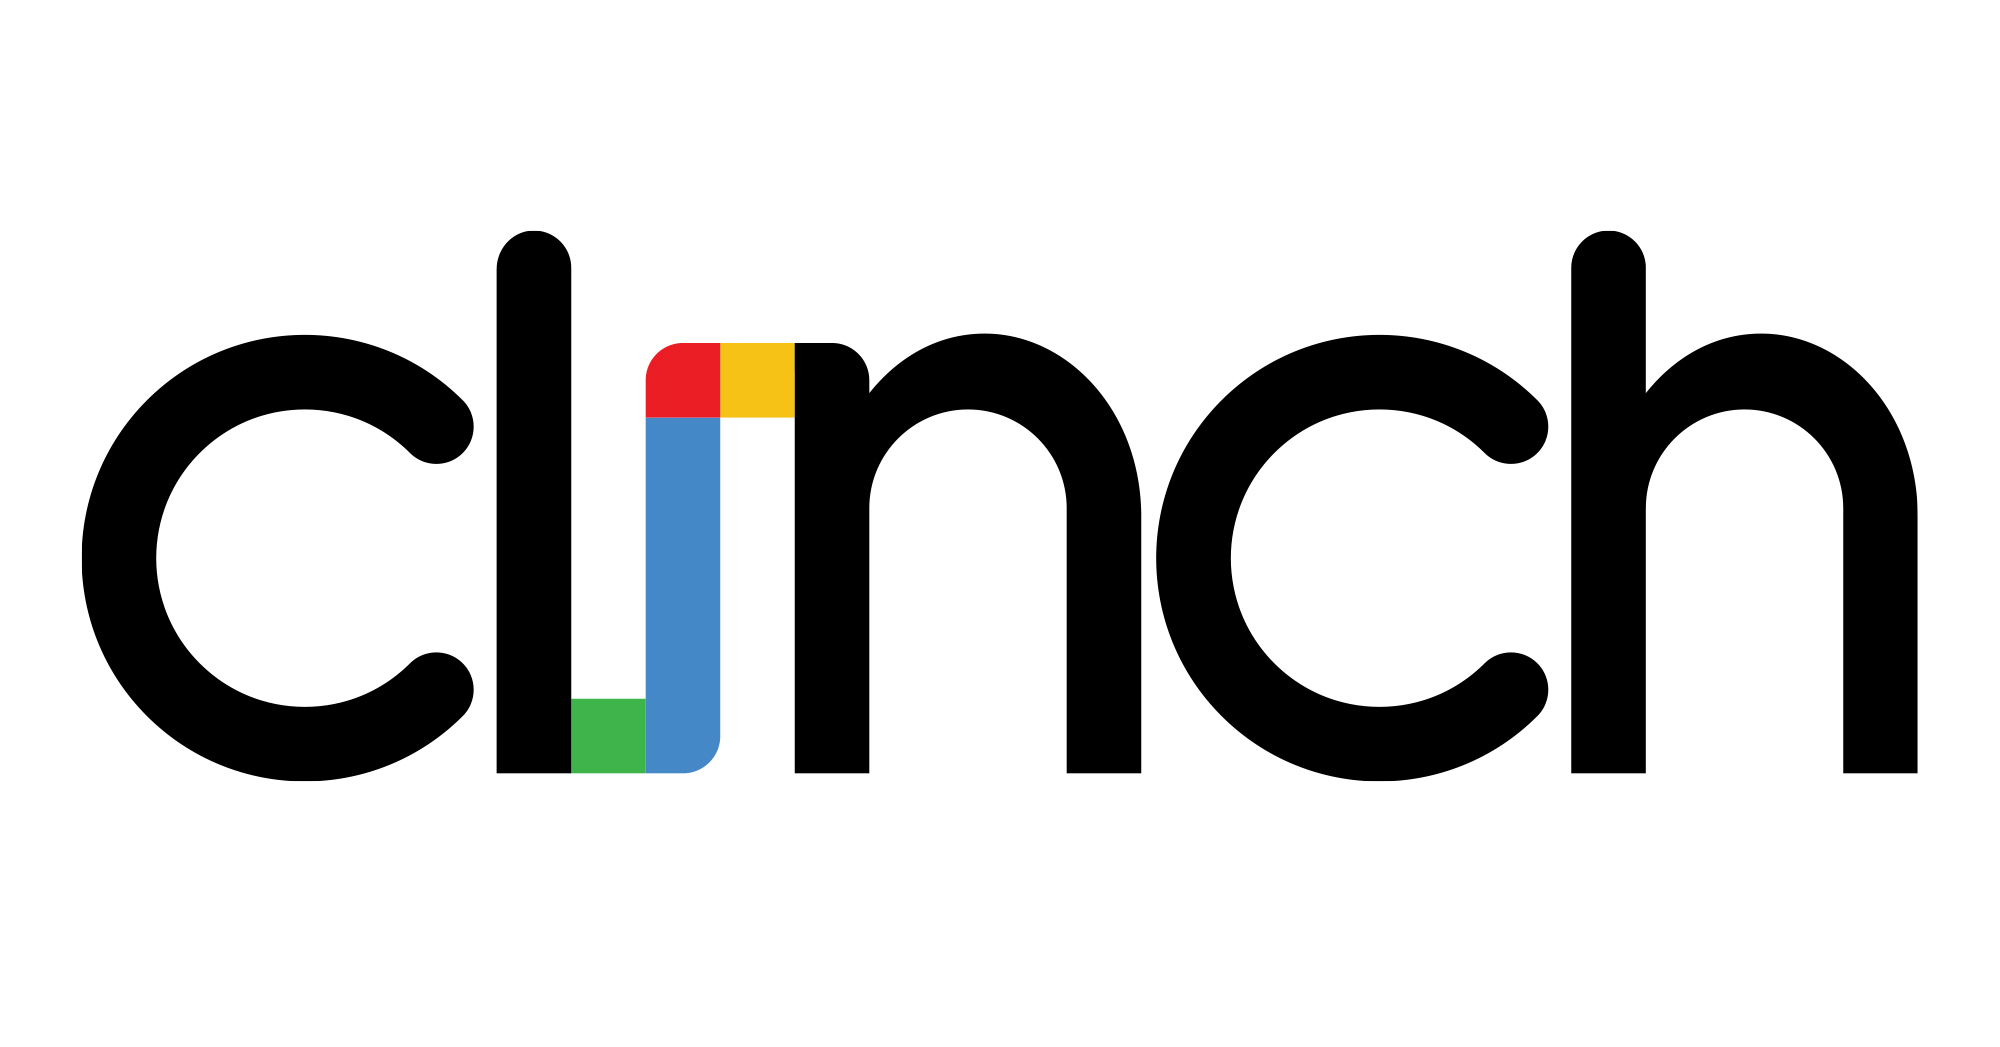 Dentsu Partners With Clinch for Dynamic Creative Optimization